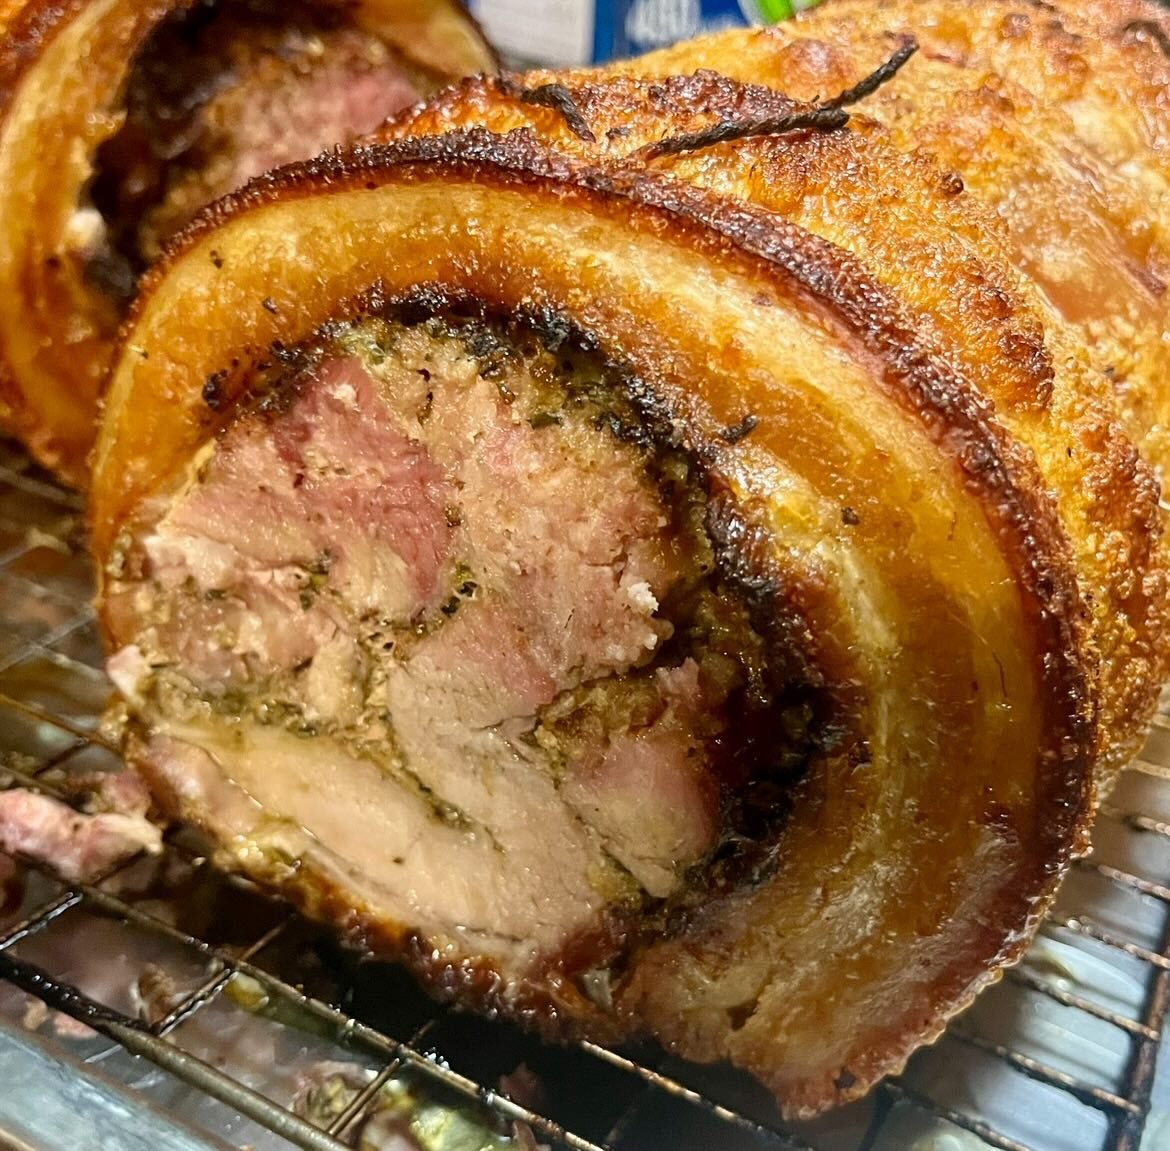 🔥🔥Join us every Sunday for a taste of Italy with our classic Italian roast porchetta.⁣🇮🇹🍷
.⁣
.⁣
.⁣
.⁣
.⁣
#beef #bestofmcr #chicken #cooking #eatmcr #foodblogger #foodgasm #foodiesofinstagram #foodlover #fridaylunch #homecooking #lunchtime #manch